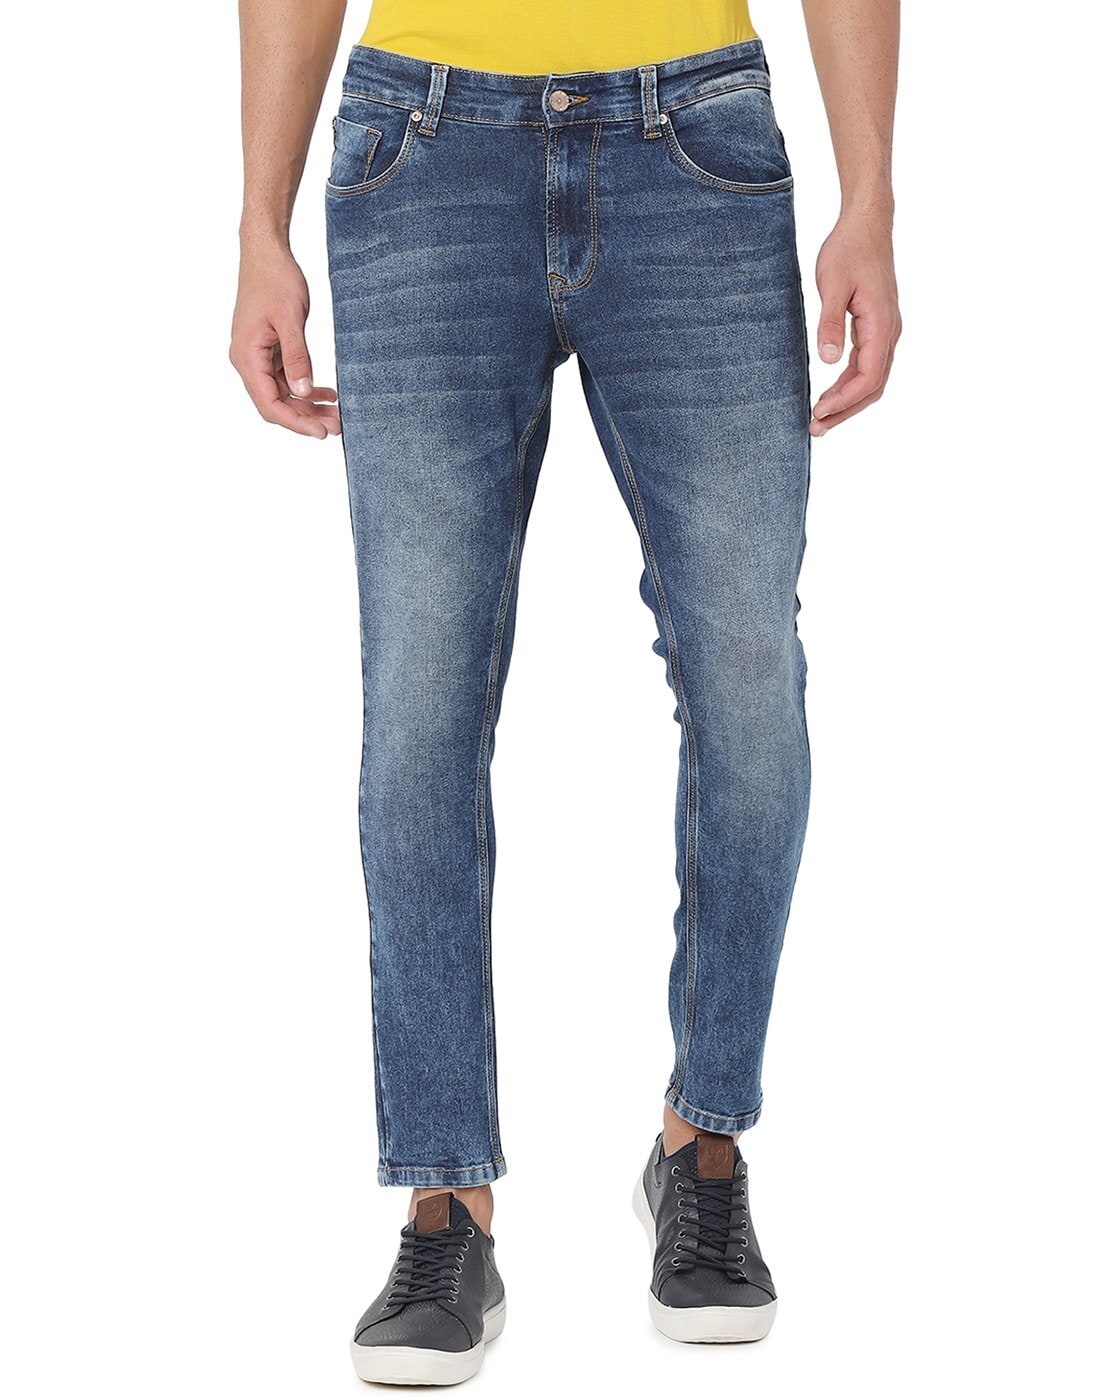 Buy SPYKAR Blue Mid Wash Cotton Tapered Fit Men's Jeans | Shoppers Stop